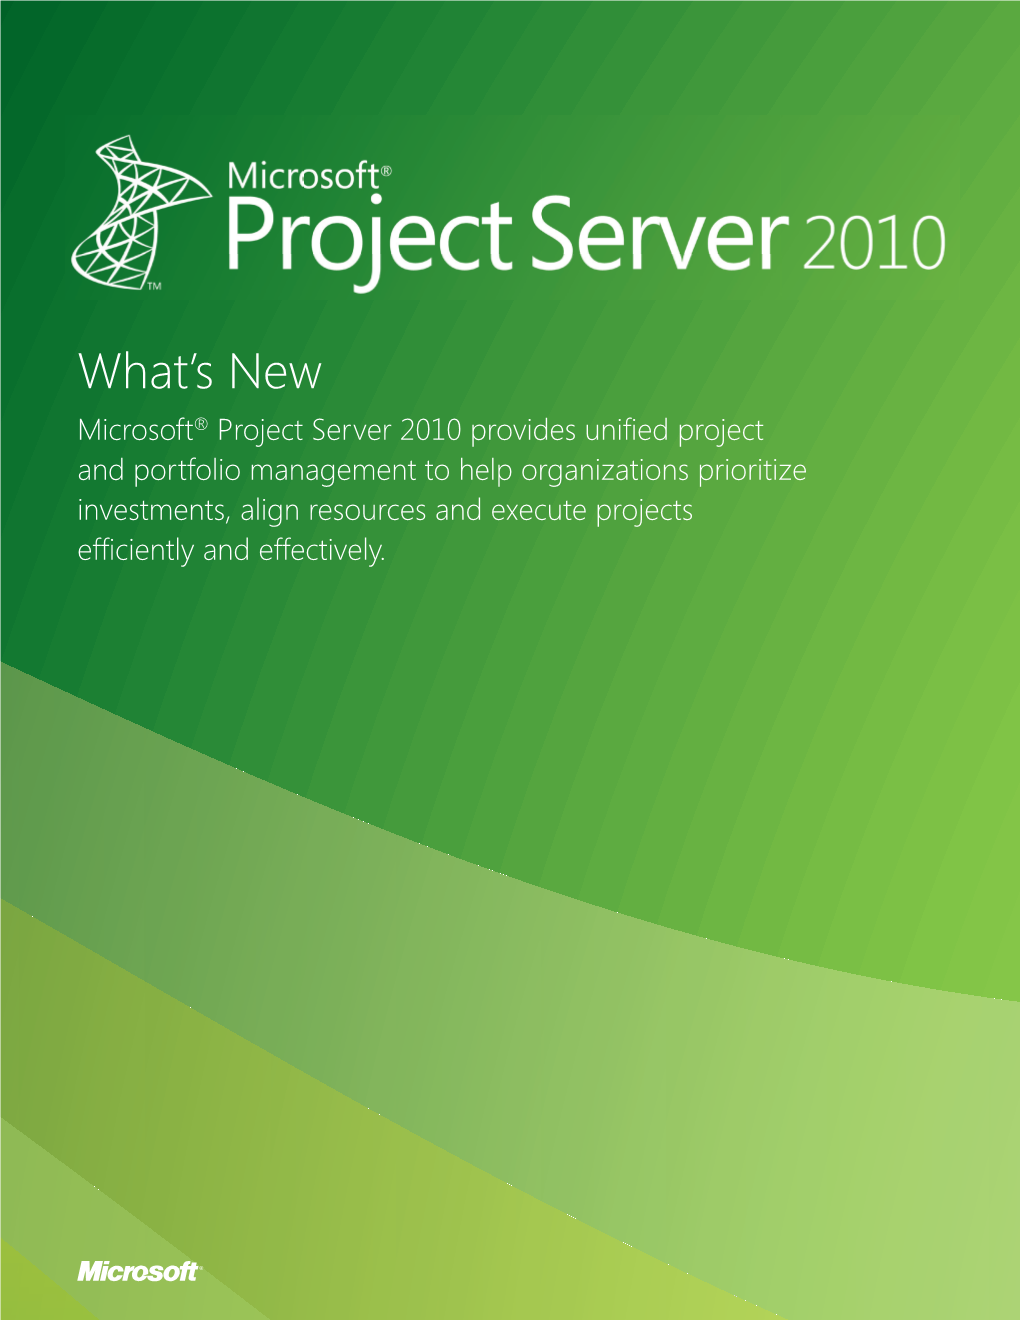 What's New in Microsoft Project Server 2010